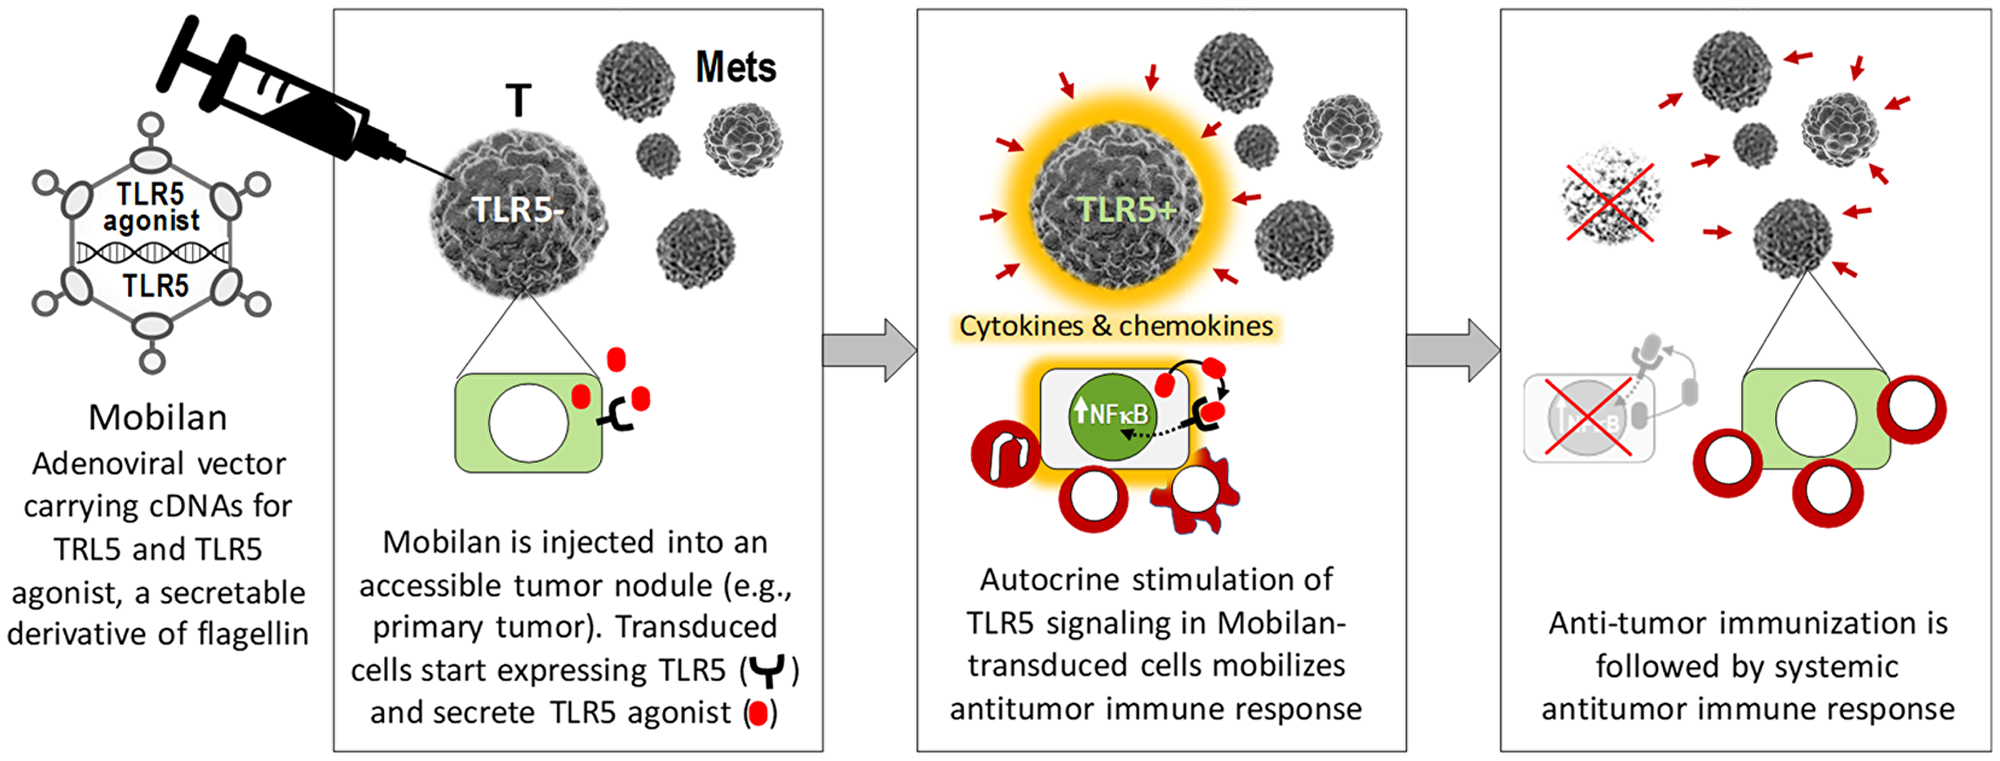 Schematic illustration of the mechanism of action of Mobilan resulting in activation of antitumor immune responses.